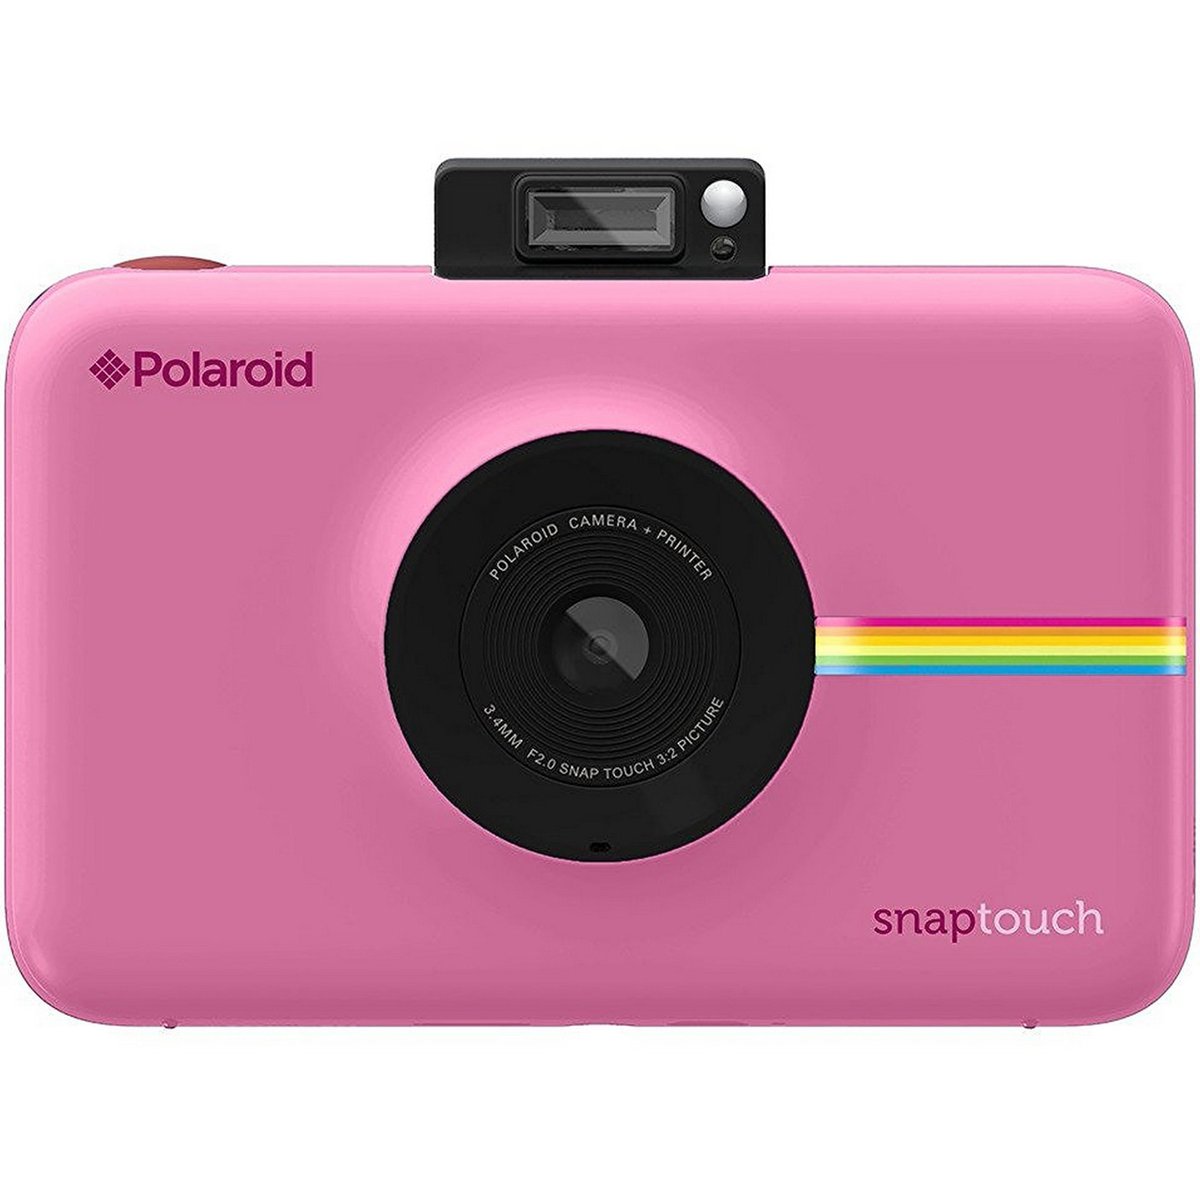 Polaroid Snap Touch Instant Print Digital Camera Pink Online at